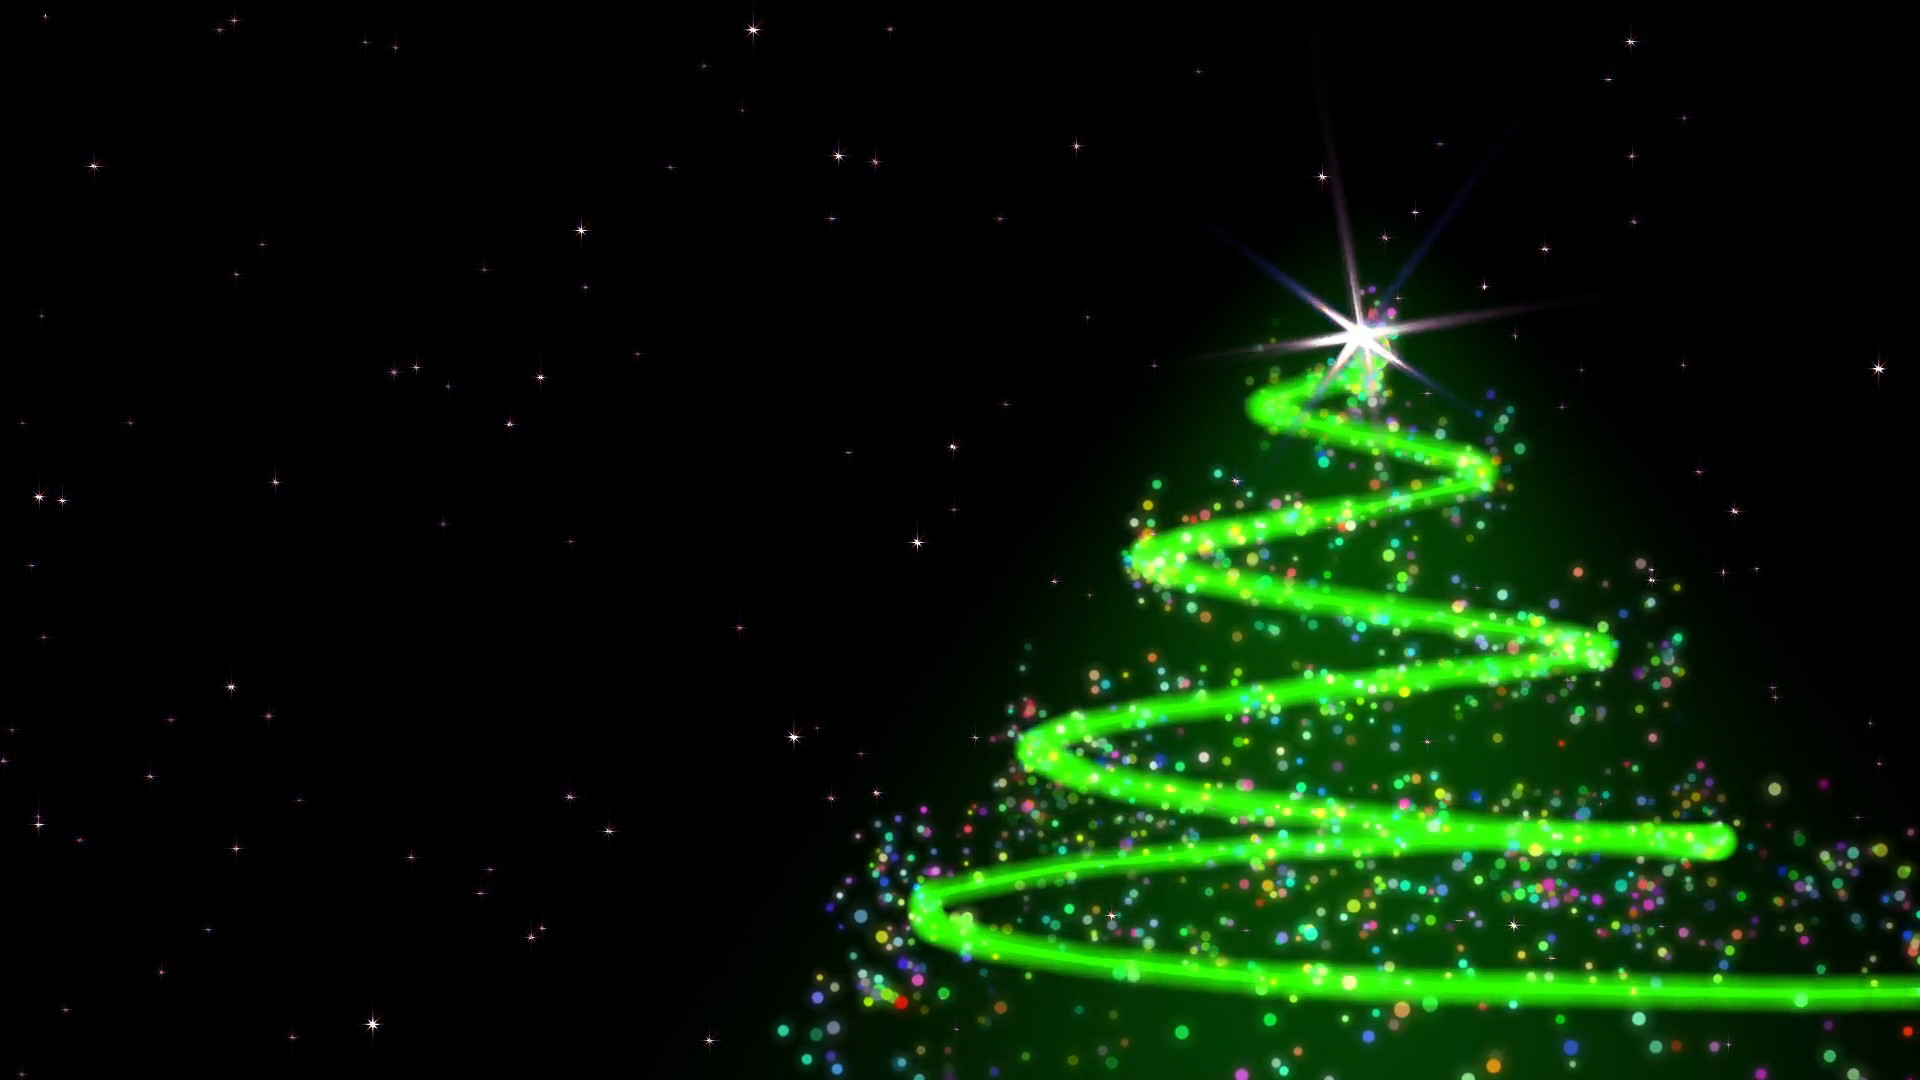 1920x1080 A black background with stars. Green text "Merry Christmas!" rises in a  spiral. Flickering tail makes the outlines of a Christmas tree Motion  Background - ...